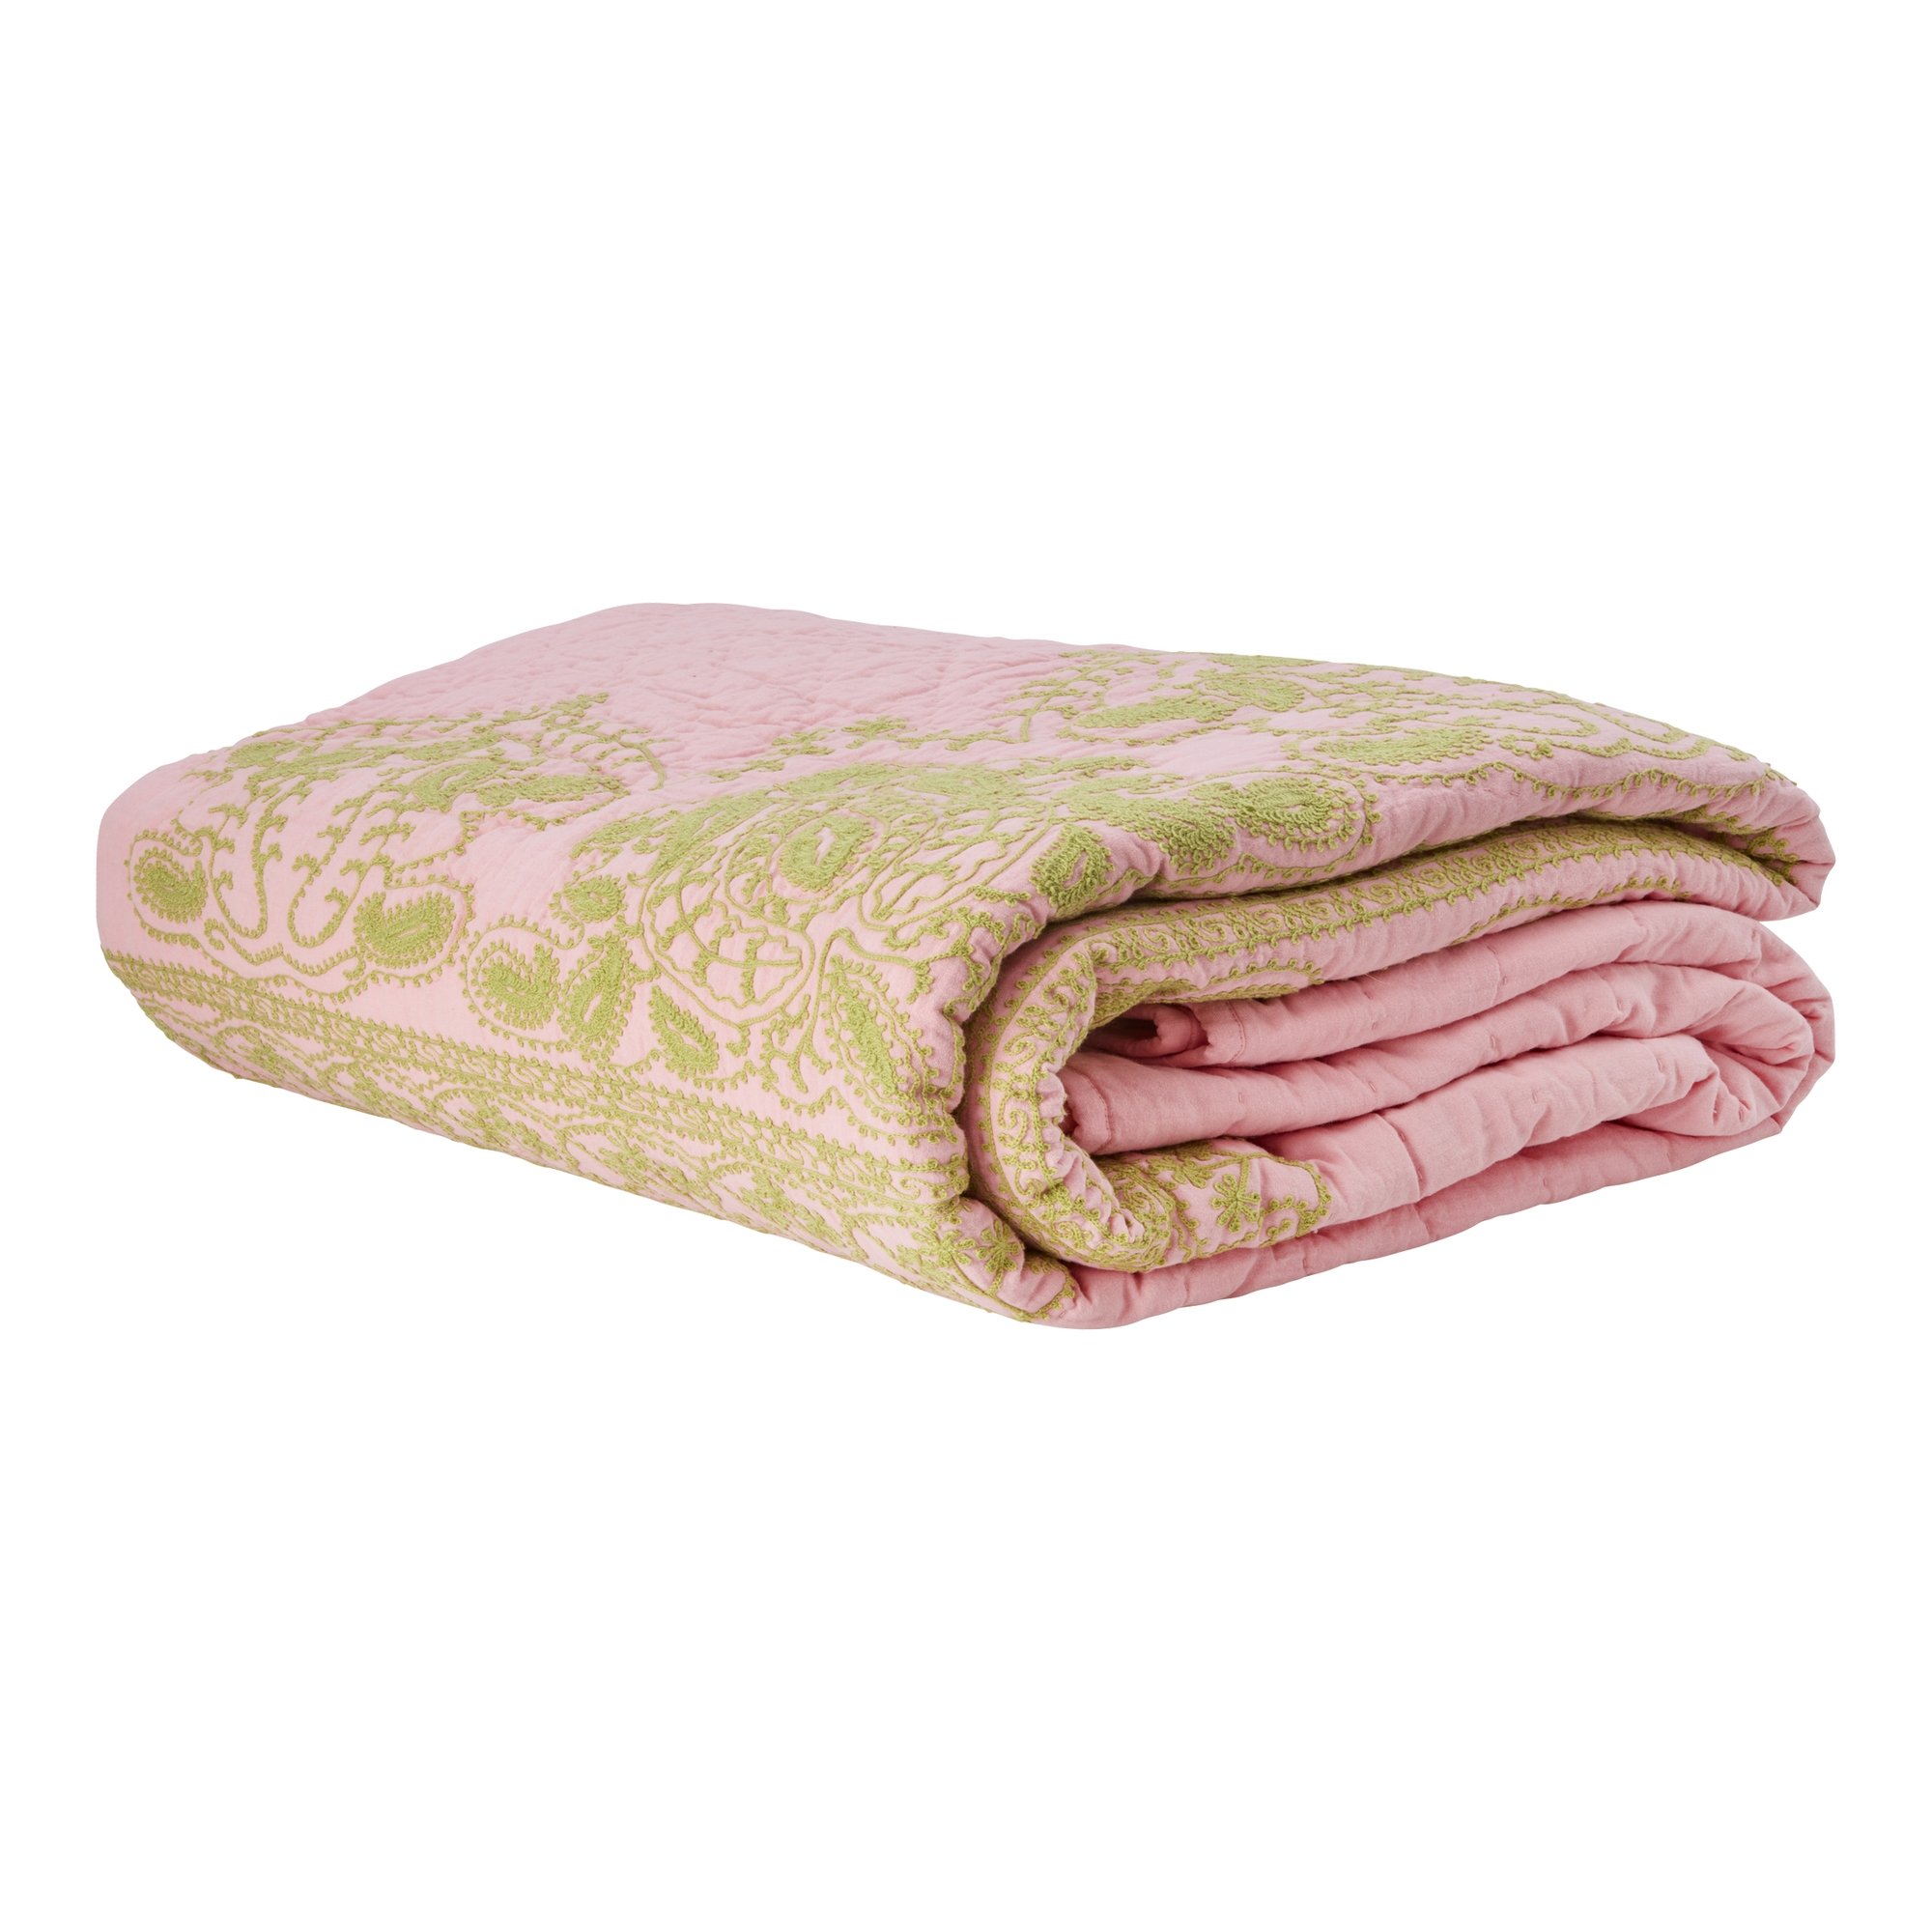 Rice - Cotton Quilt Bedspread in Soft Pink with Green Embroidery